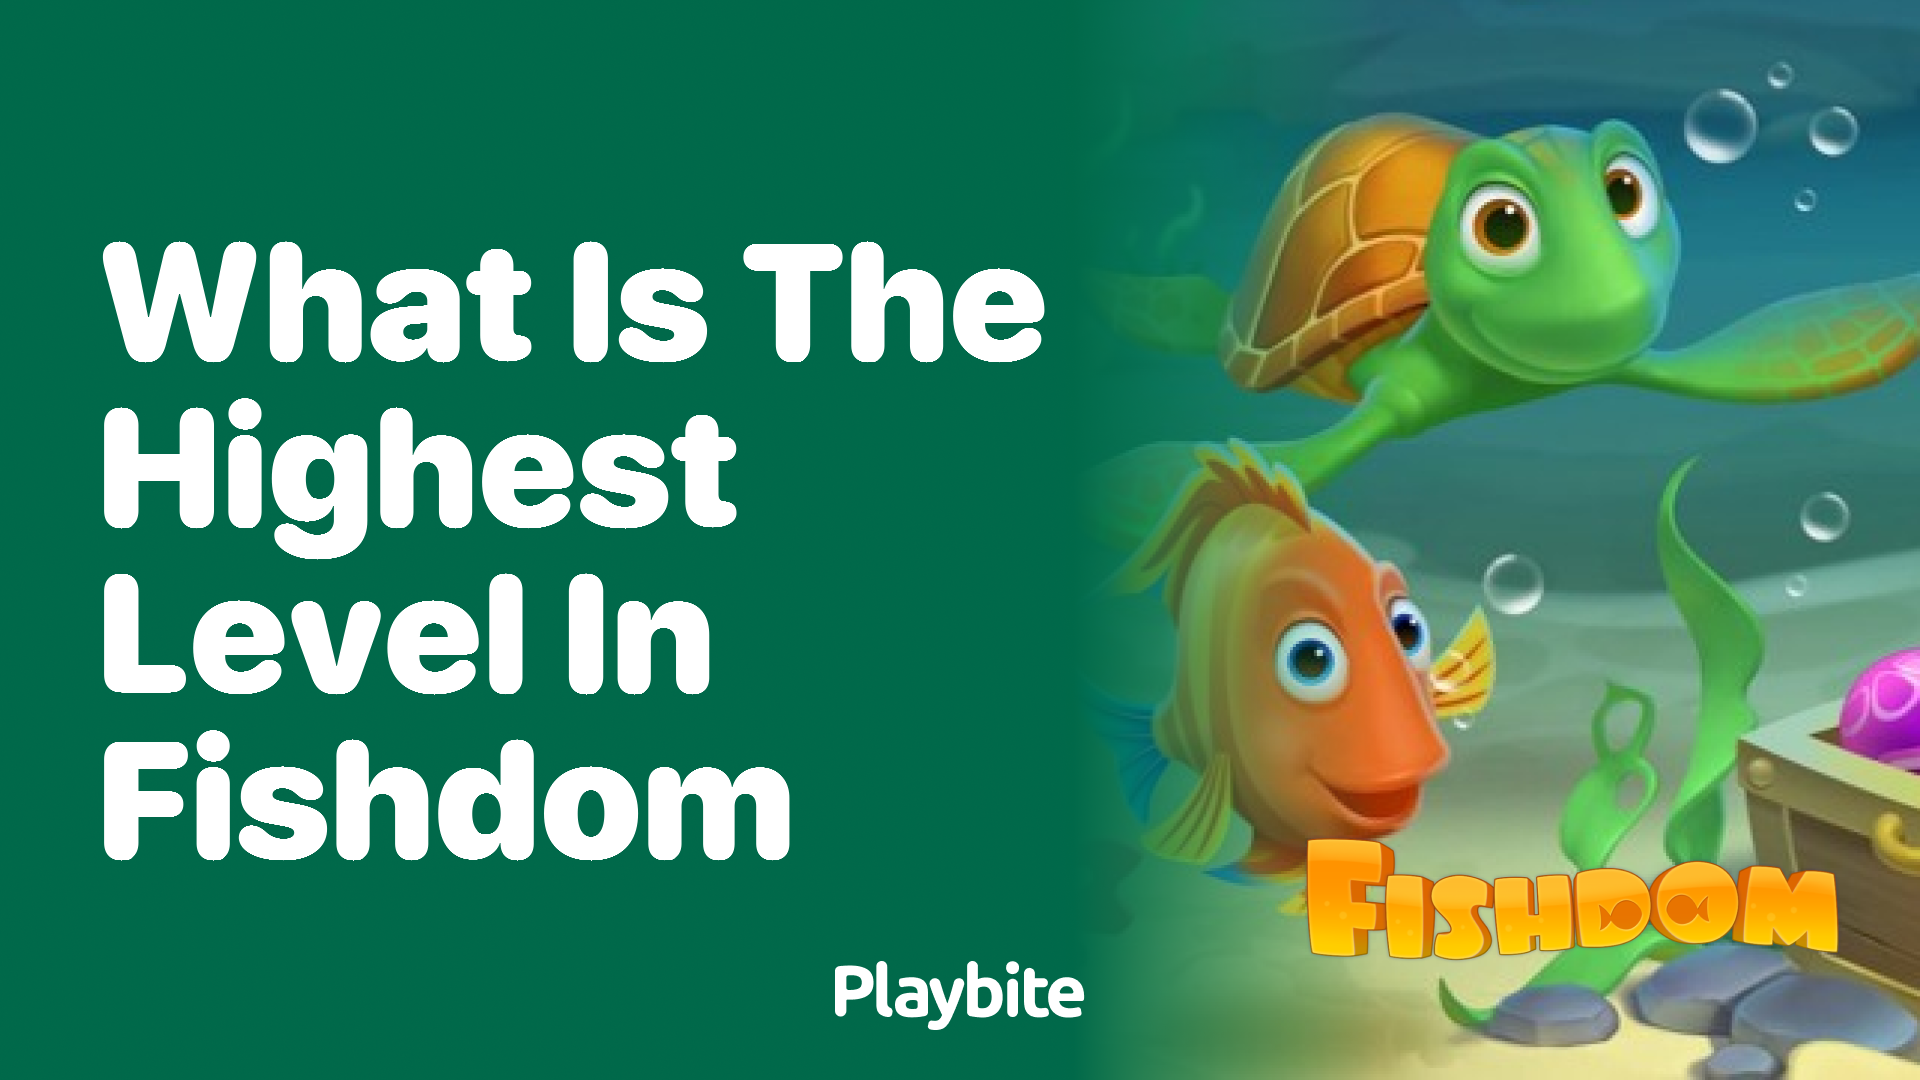 What Is the Highest Level in Fishdom?